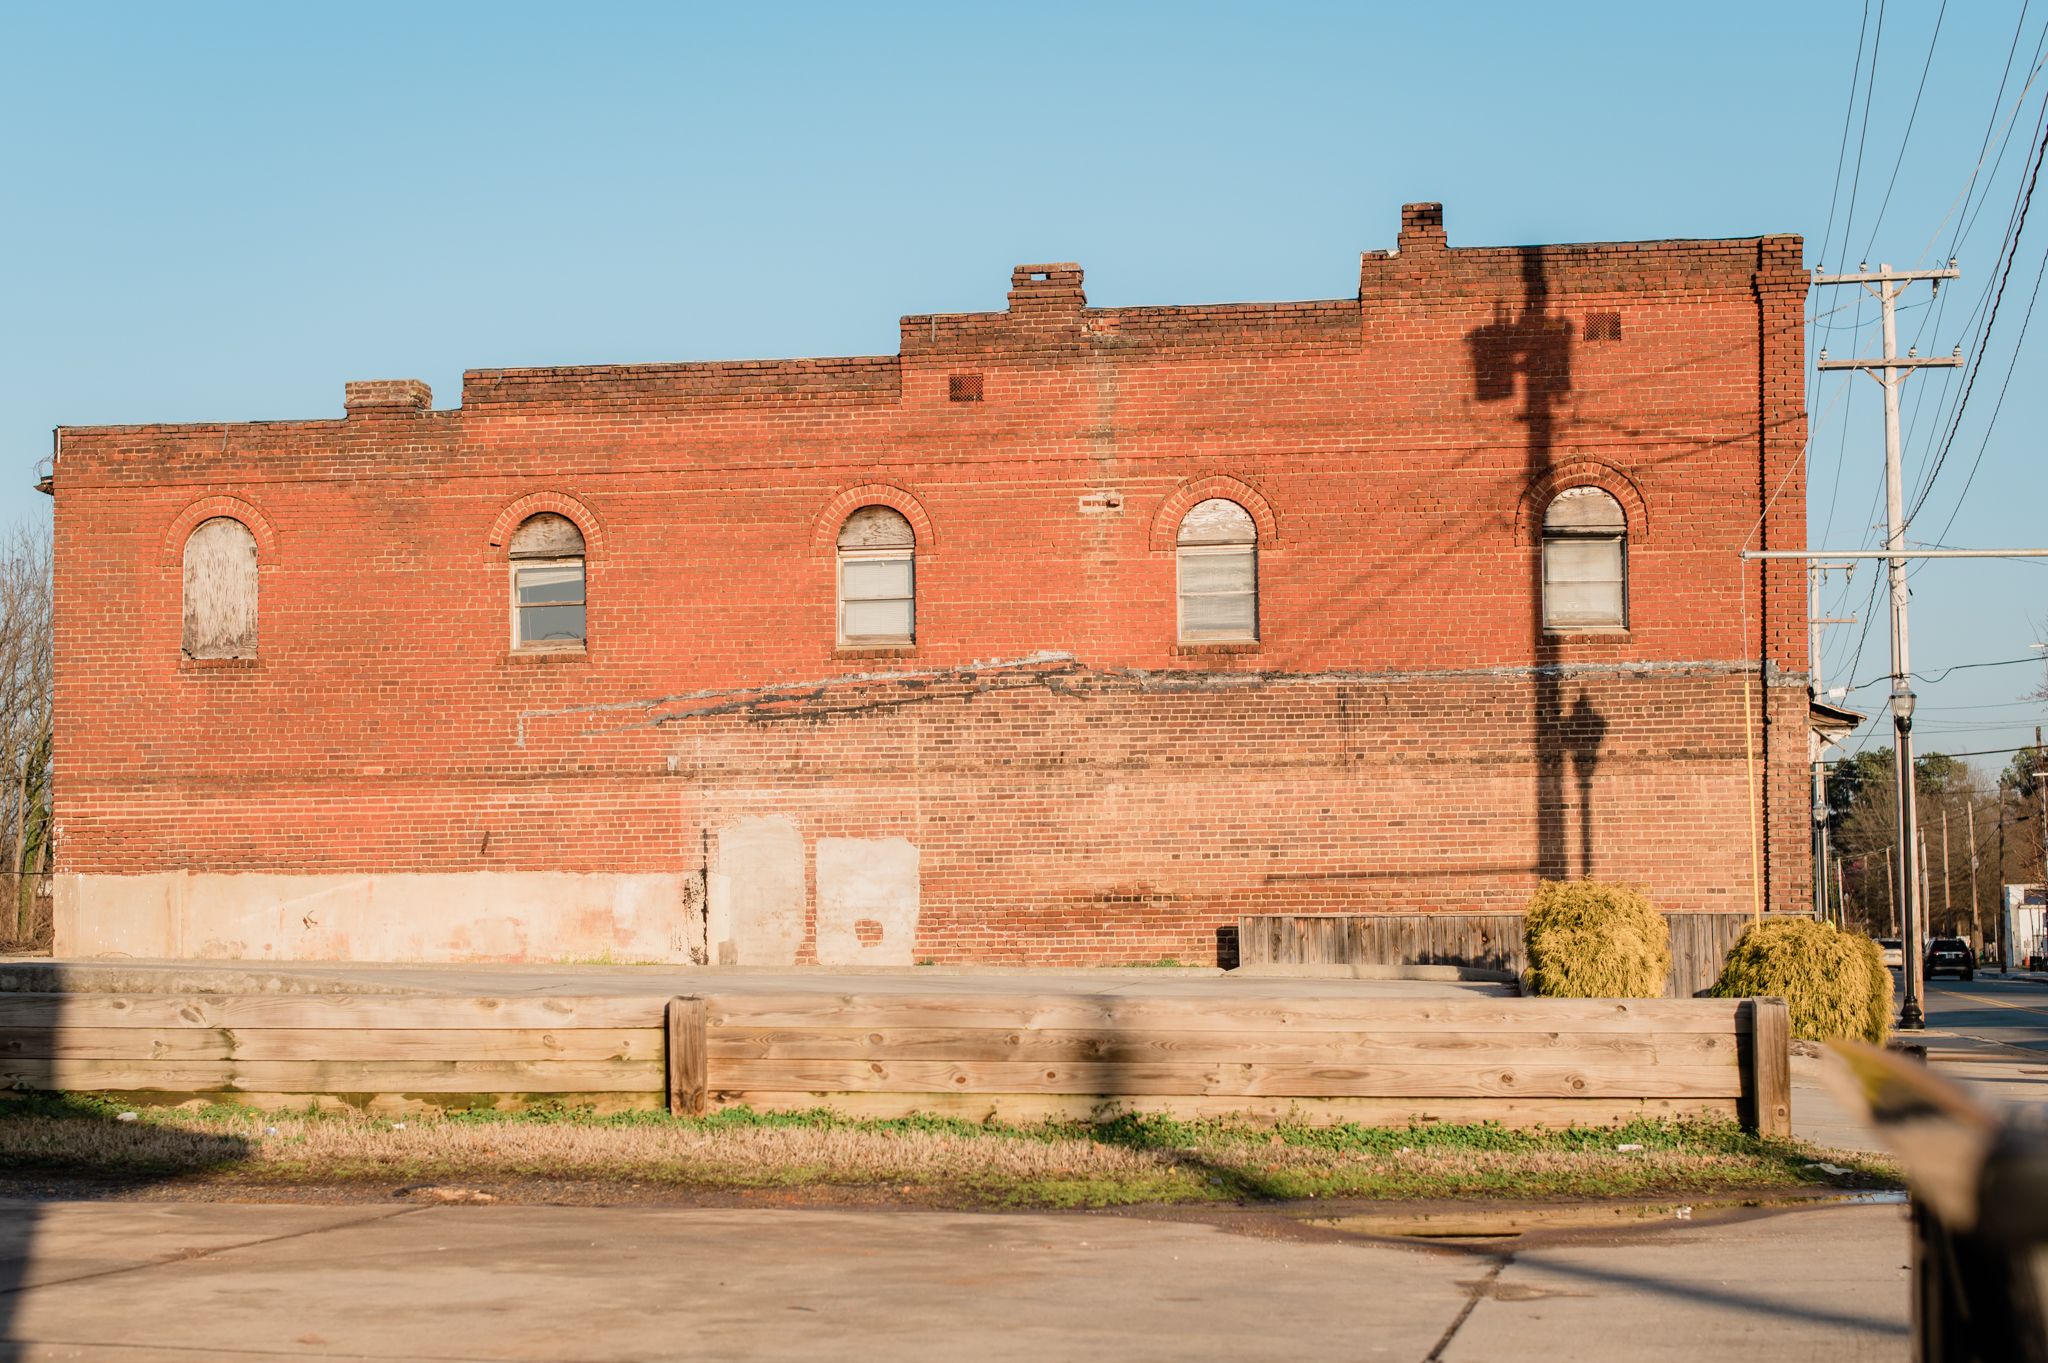 The vacant lot of the Kilby Arcade Building where the Kilby Hotel once stood in High Point, NC.